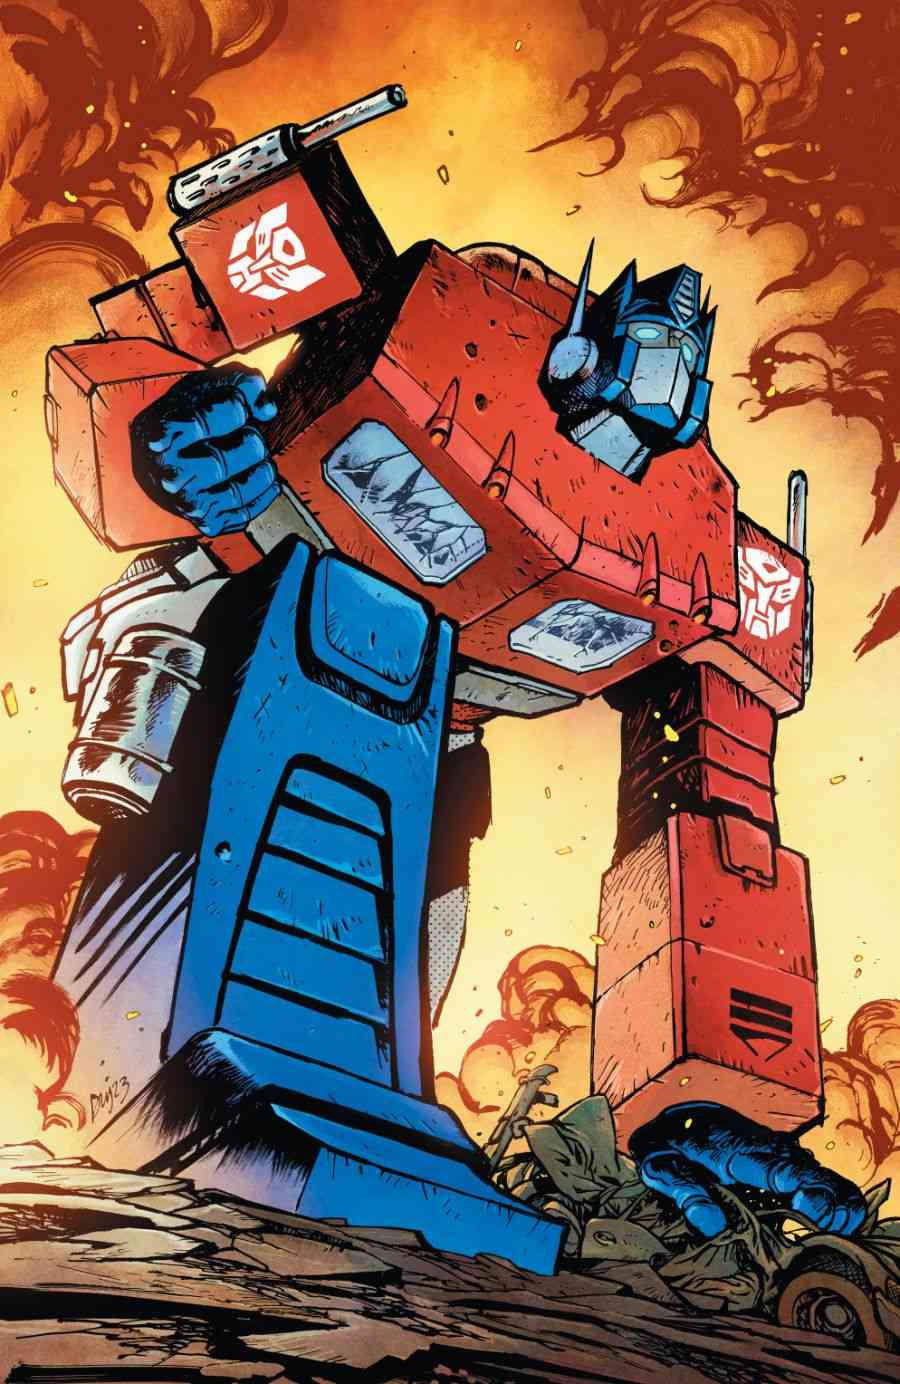 Transformers #1 Cover A by Daniel Warren Johnson and Mike Spicer